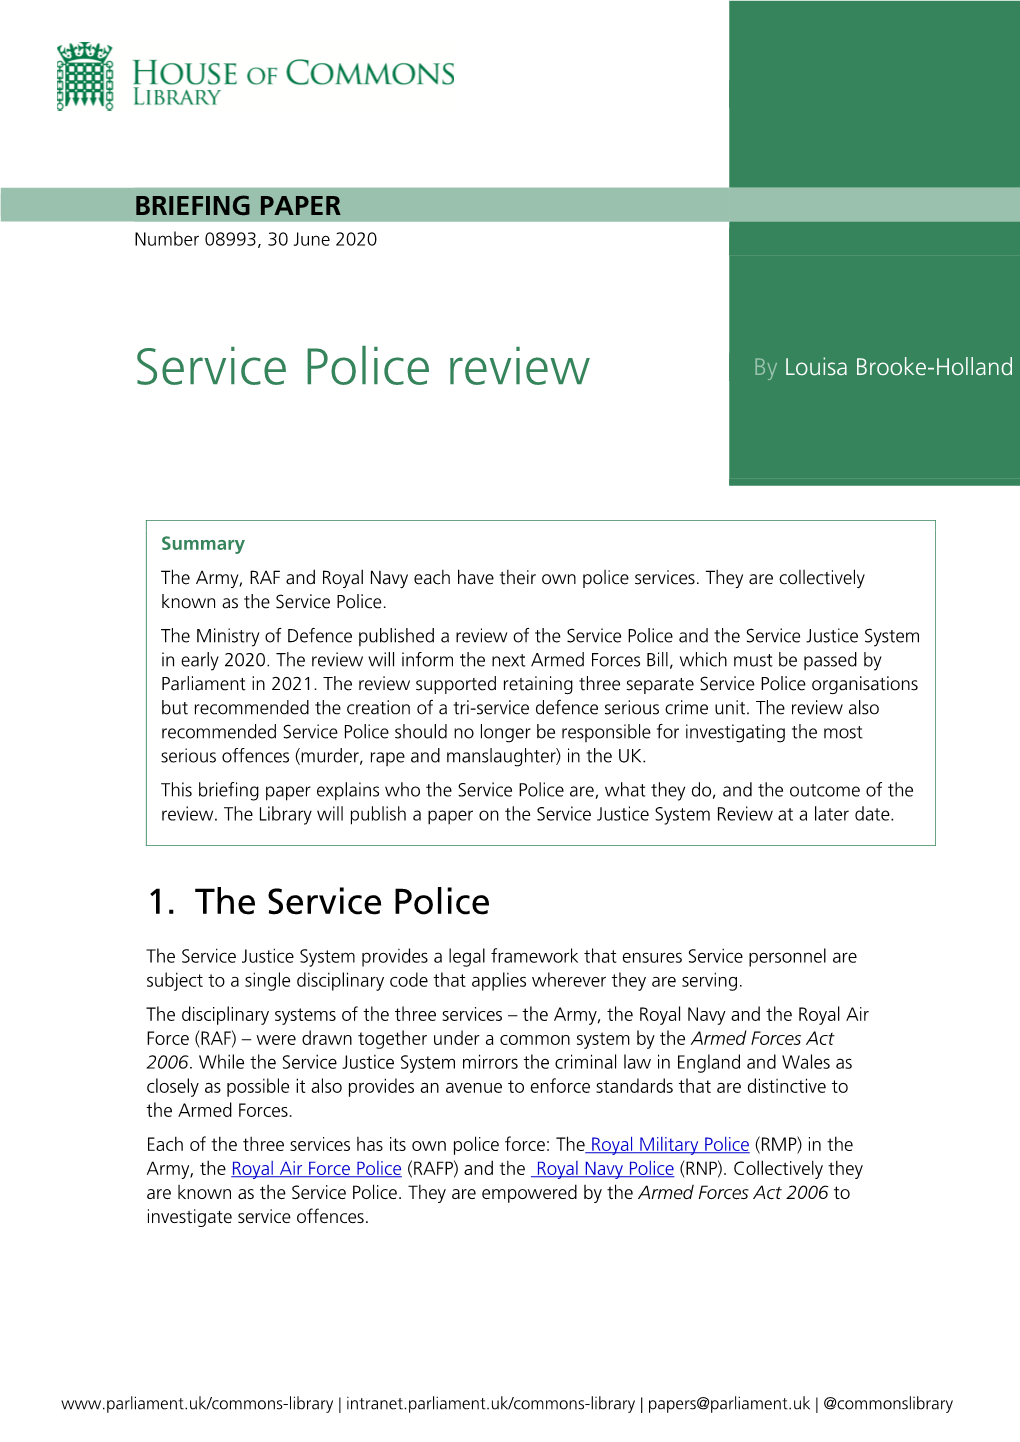 Service Police Review by Louisa Brooke-Holland